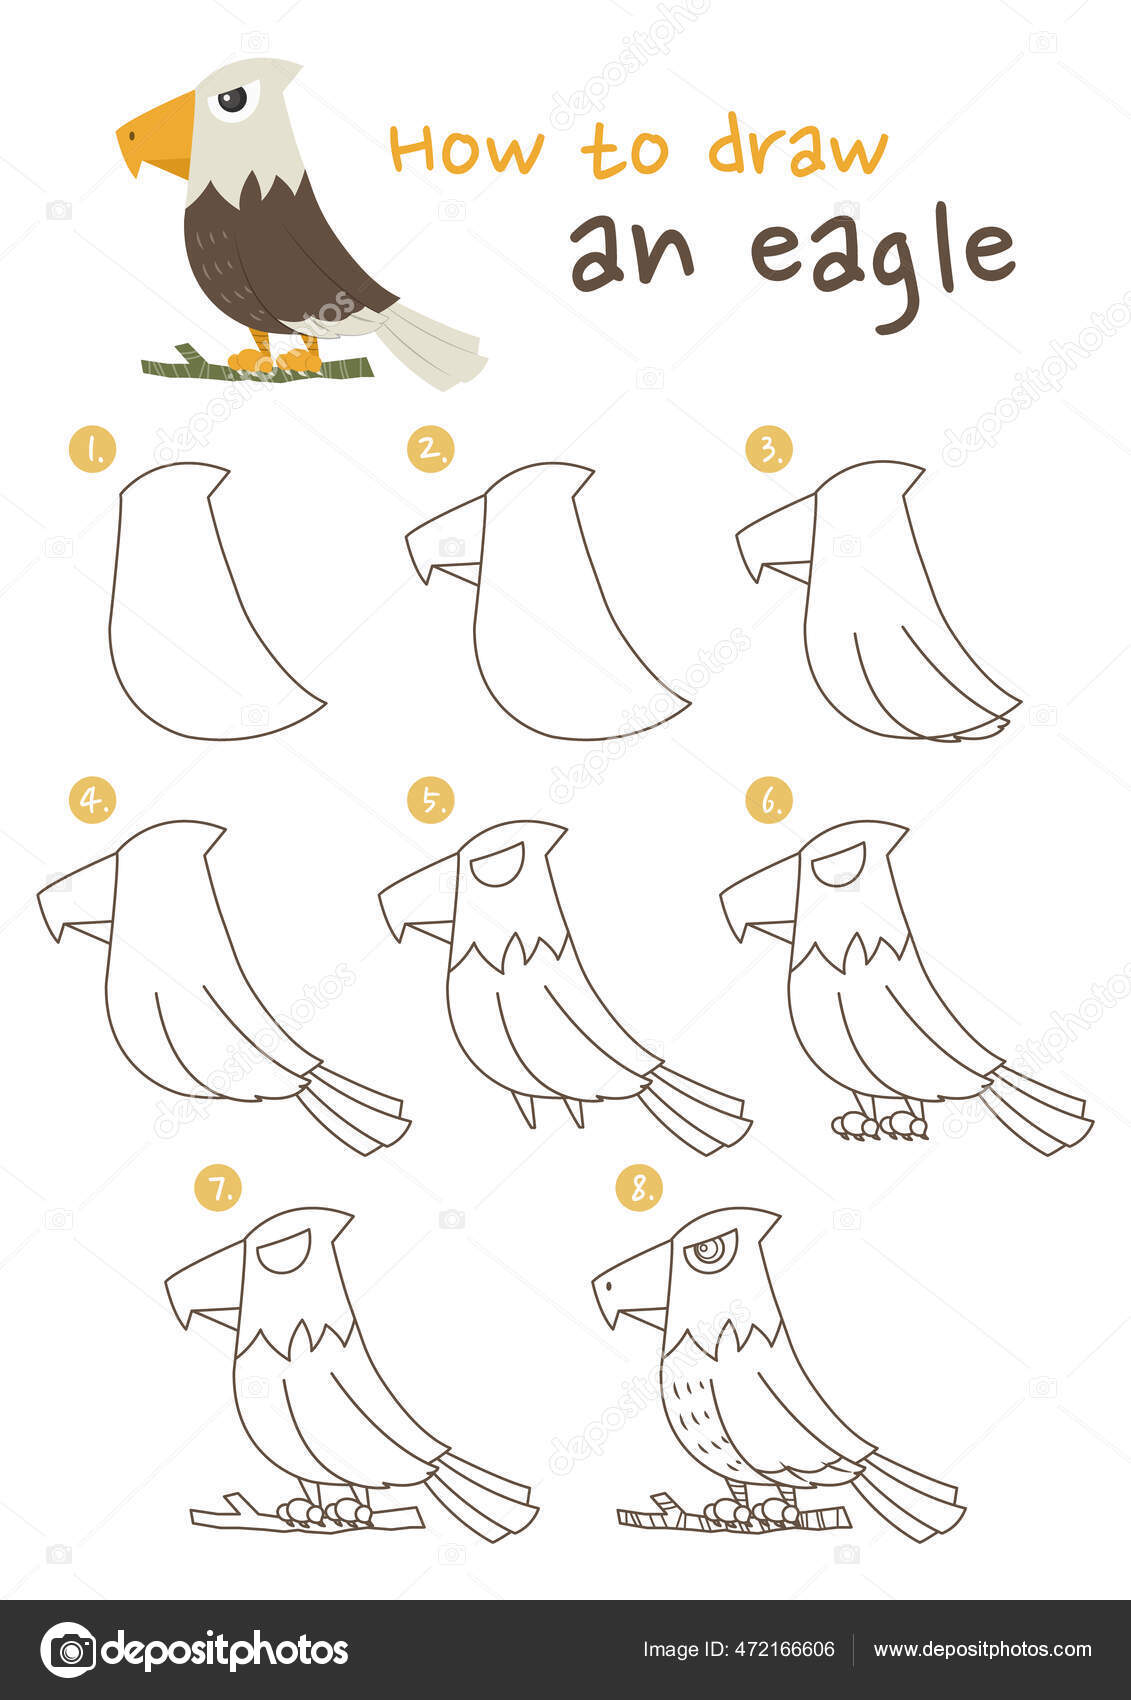 Poultry steps Vector Art Stock Images | Depositphotos